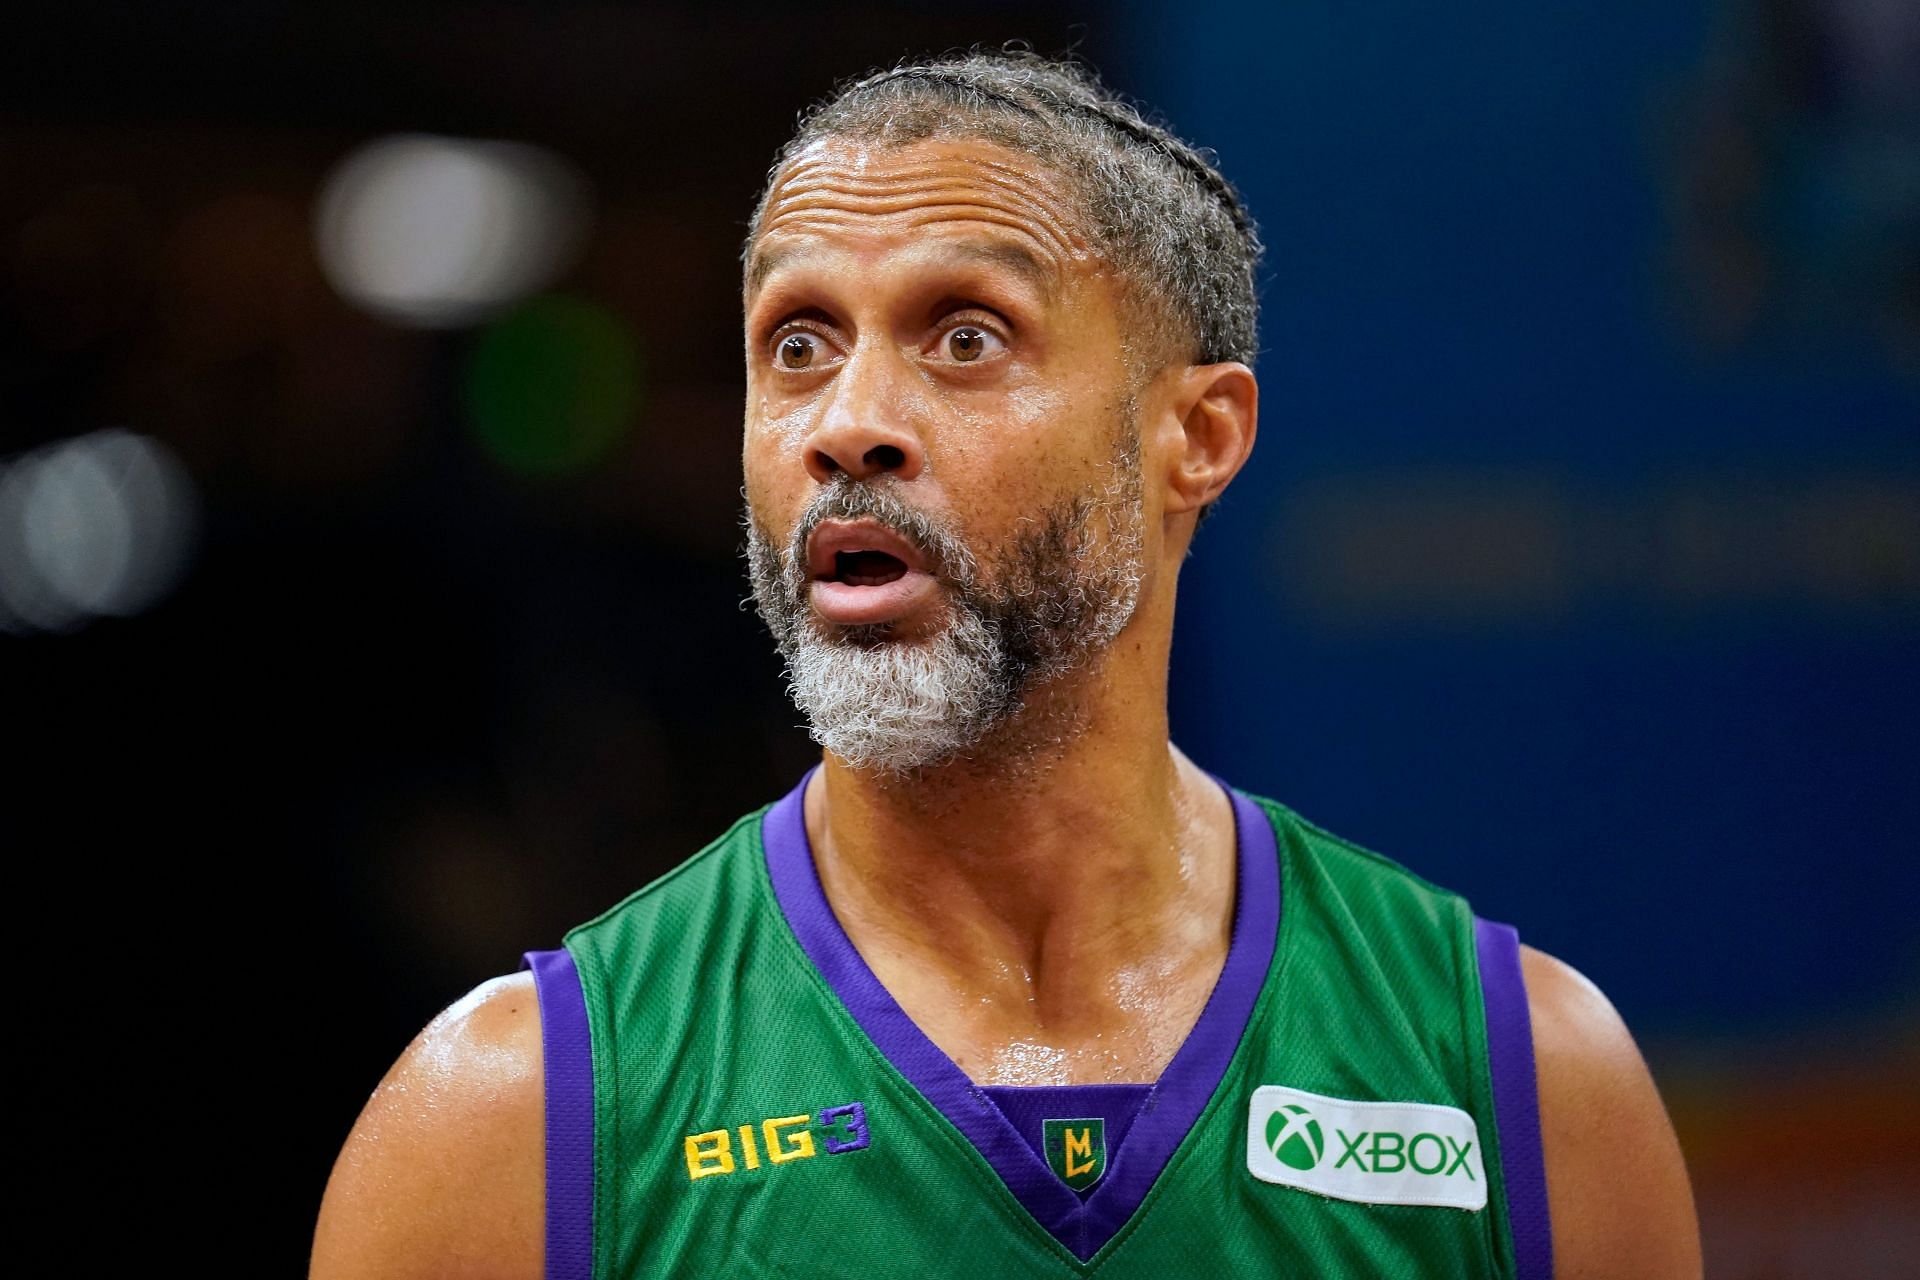 Mahmoud Abdul-Rauf: Here, gone and quickly forgotten 